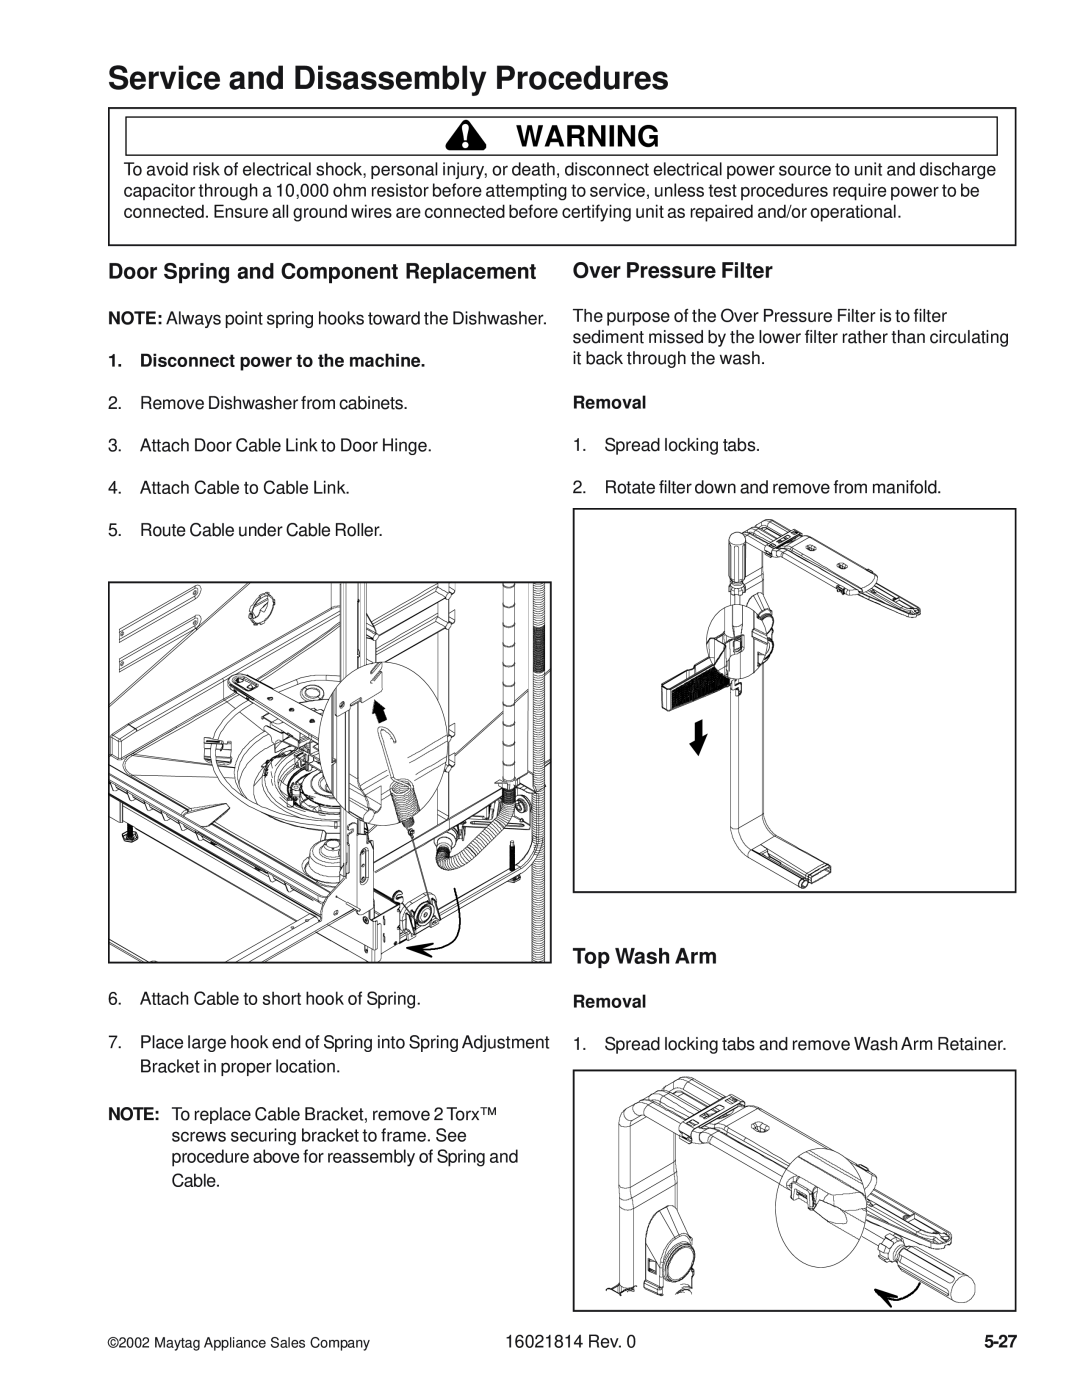 Maytag MDBF550AW manual Top Wash Arm, Service and Disassembly Procedures, Disconnect power to the machine, Removal, 5-27 